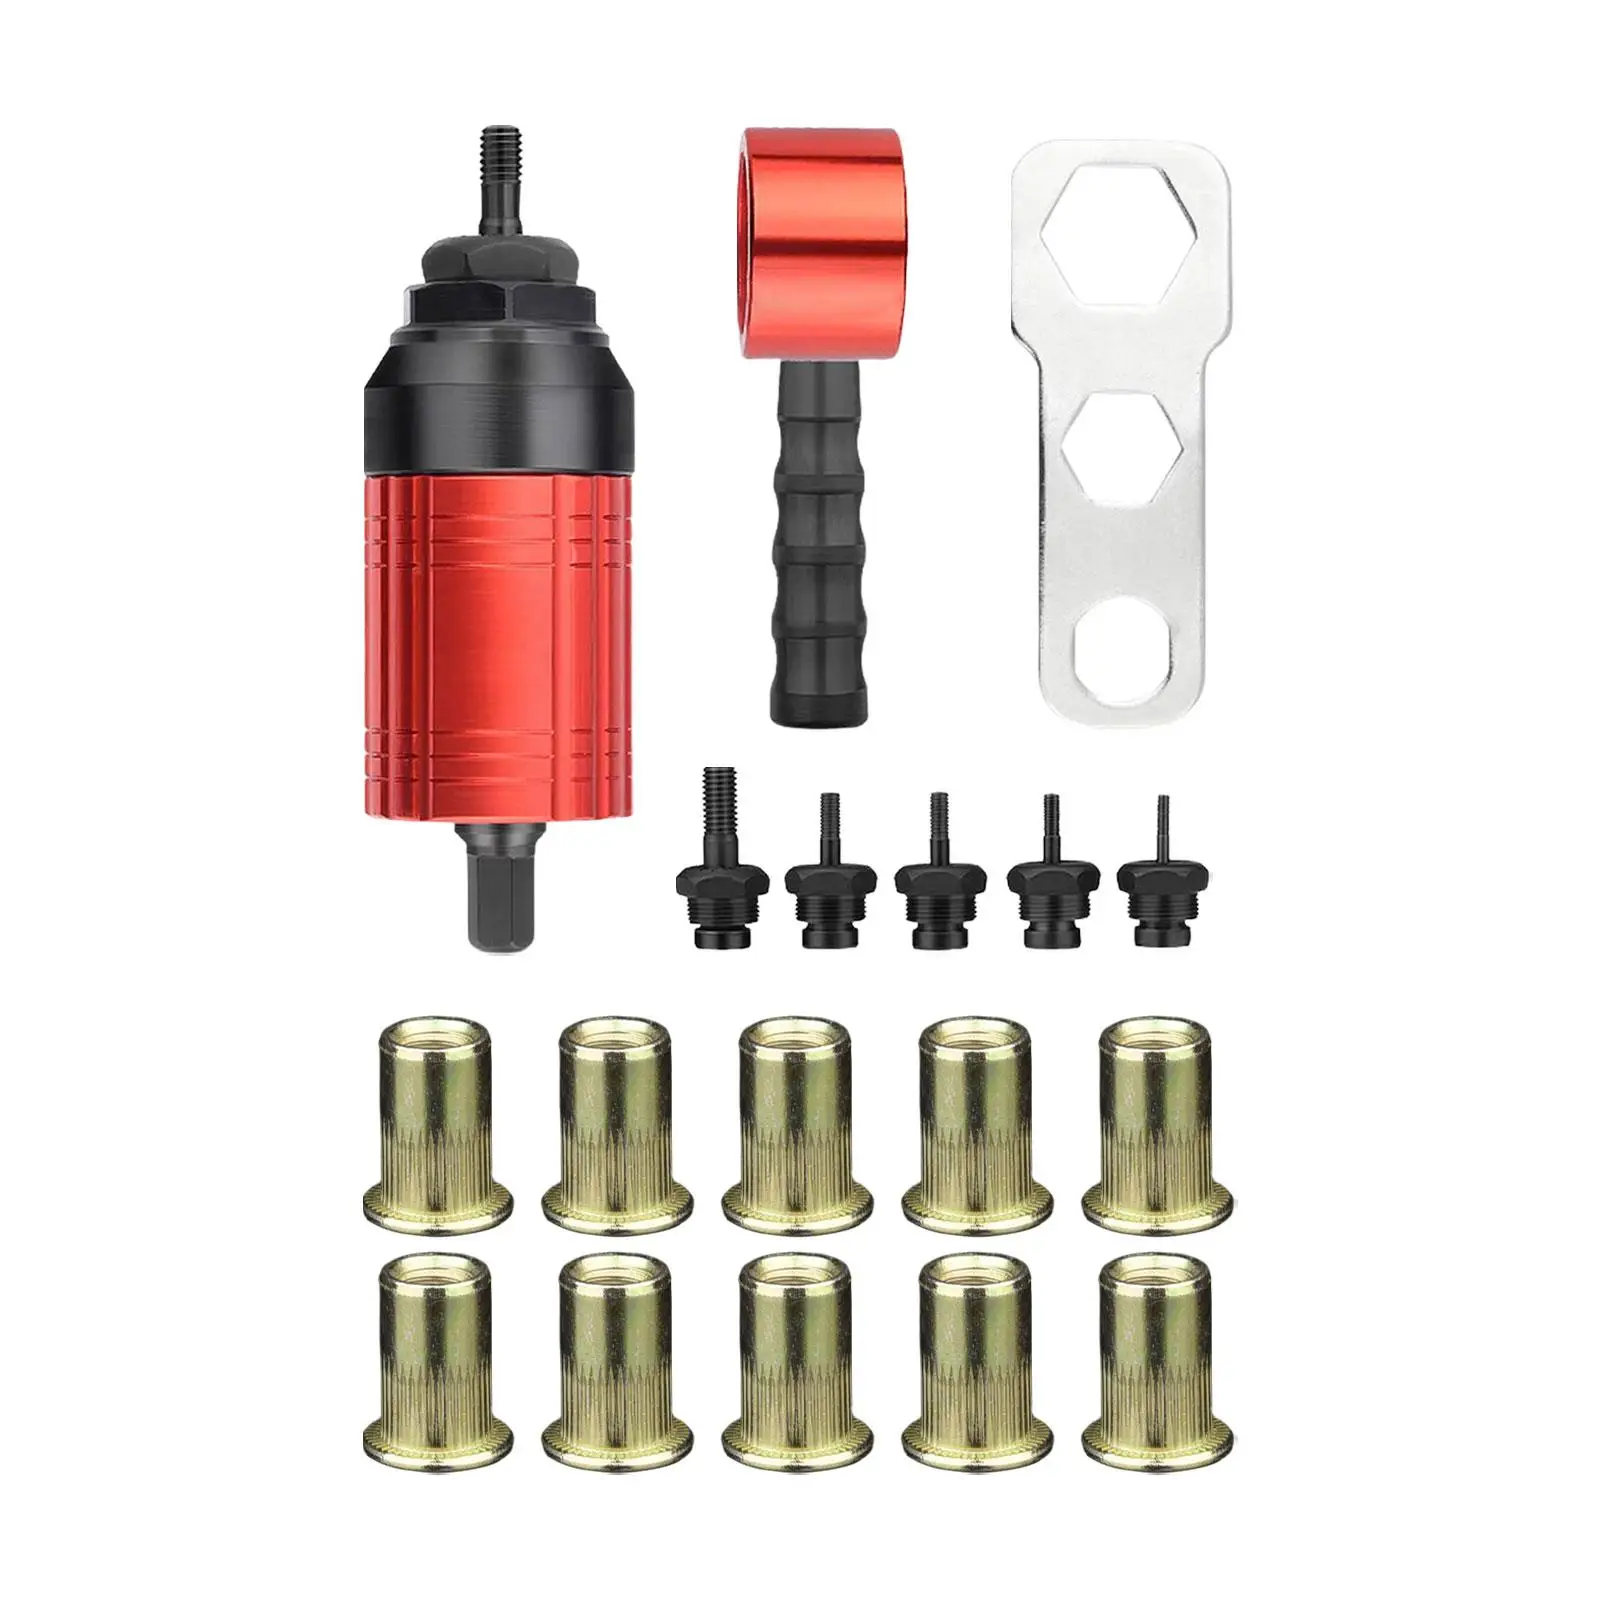 Rivet Nut Drill Adaptor Spare Parts Threaded Insert Installation Tool for Furniture Electrical Appliance Car Repair Architecture